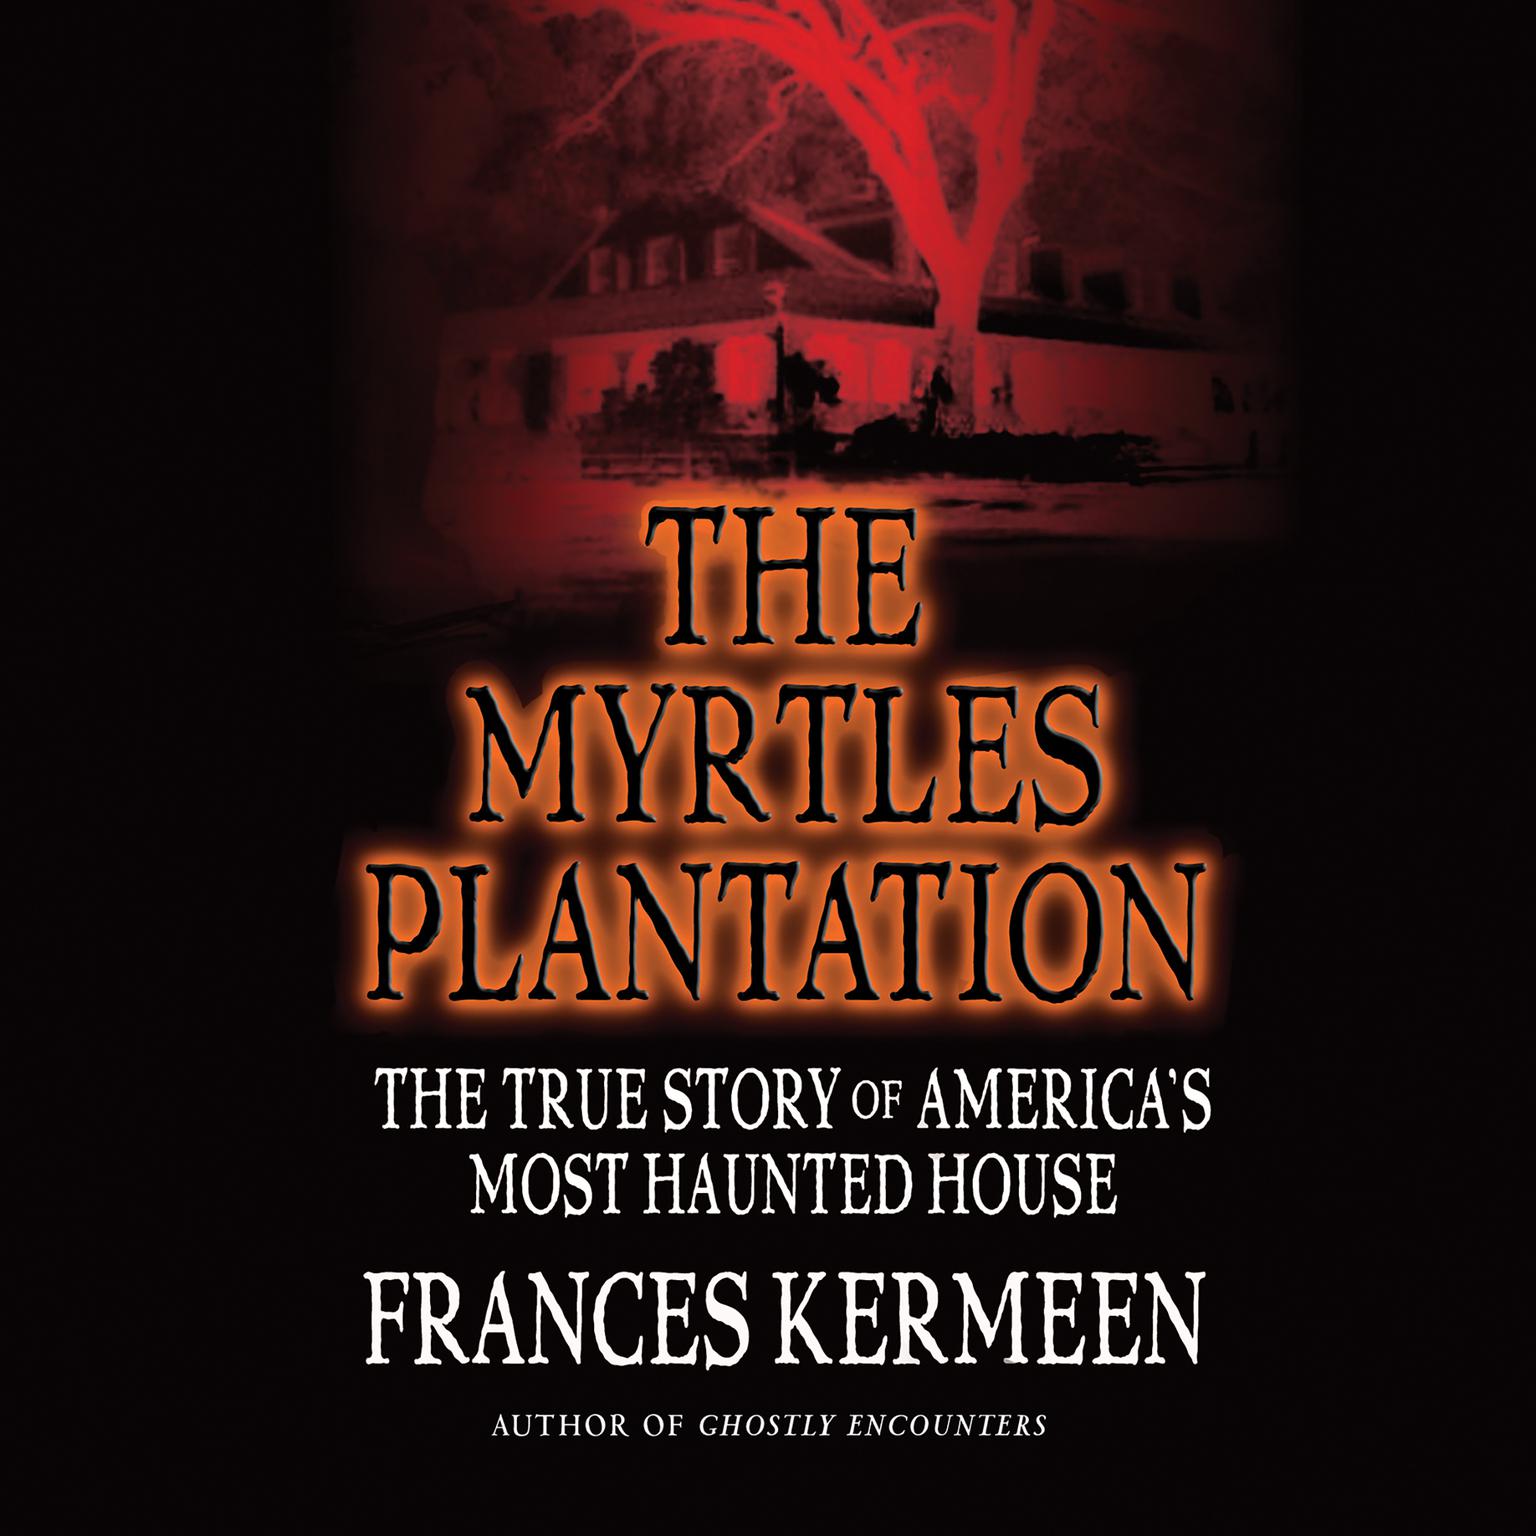 The Myrtles Plantation: The True Story of Americas Most Haunted House Audiobook, by Frances Kermeen